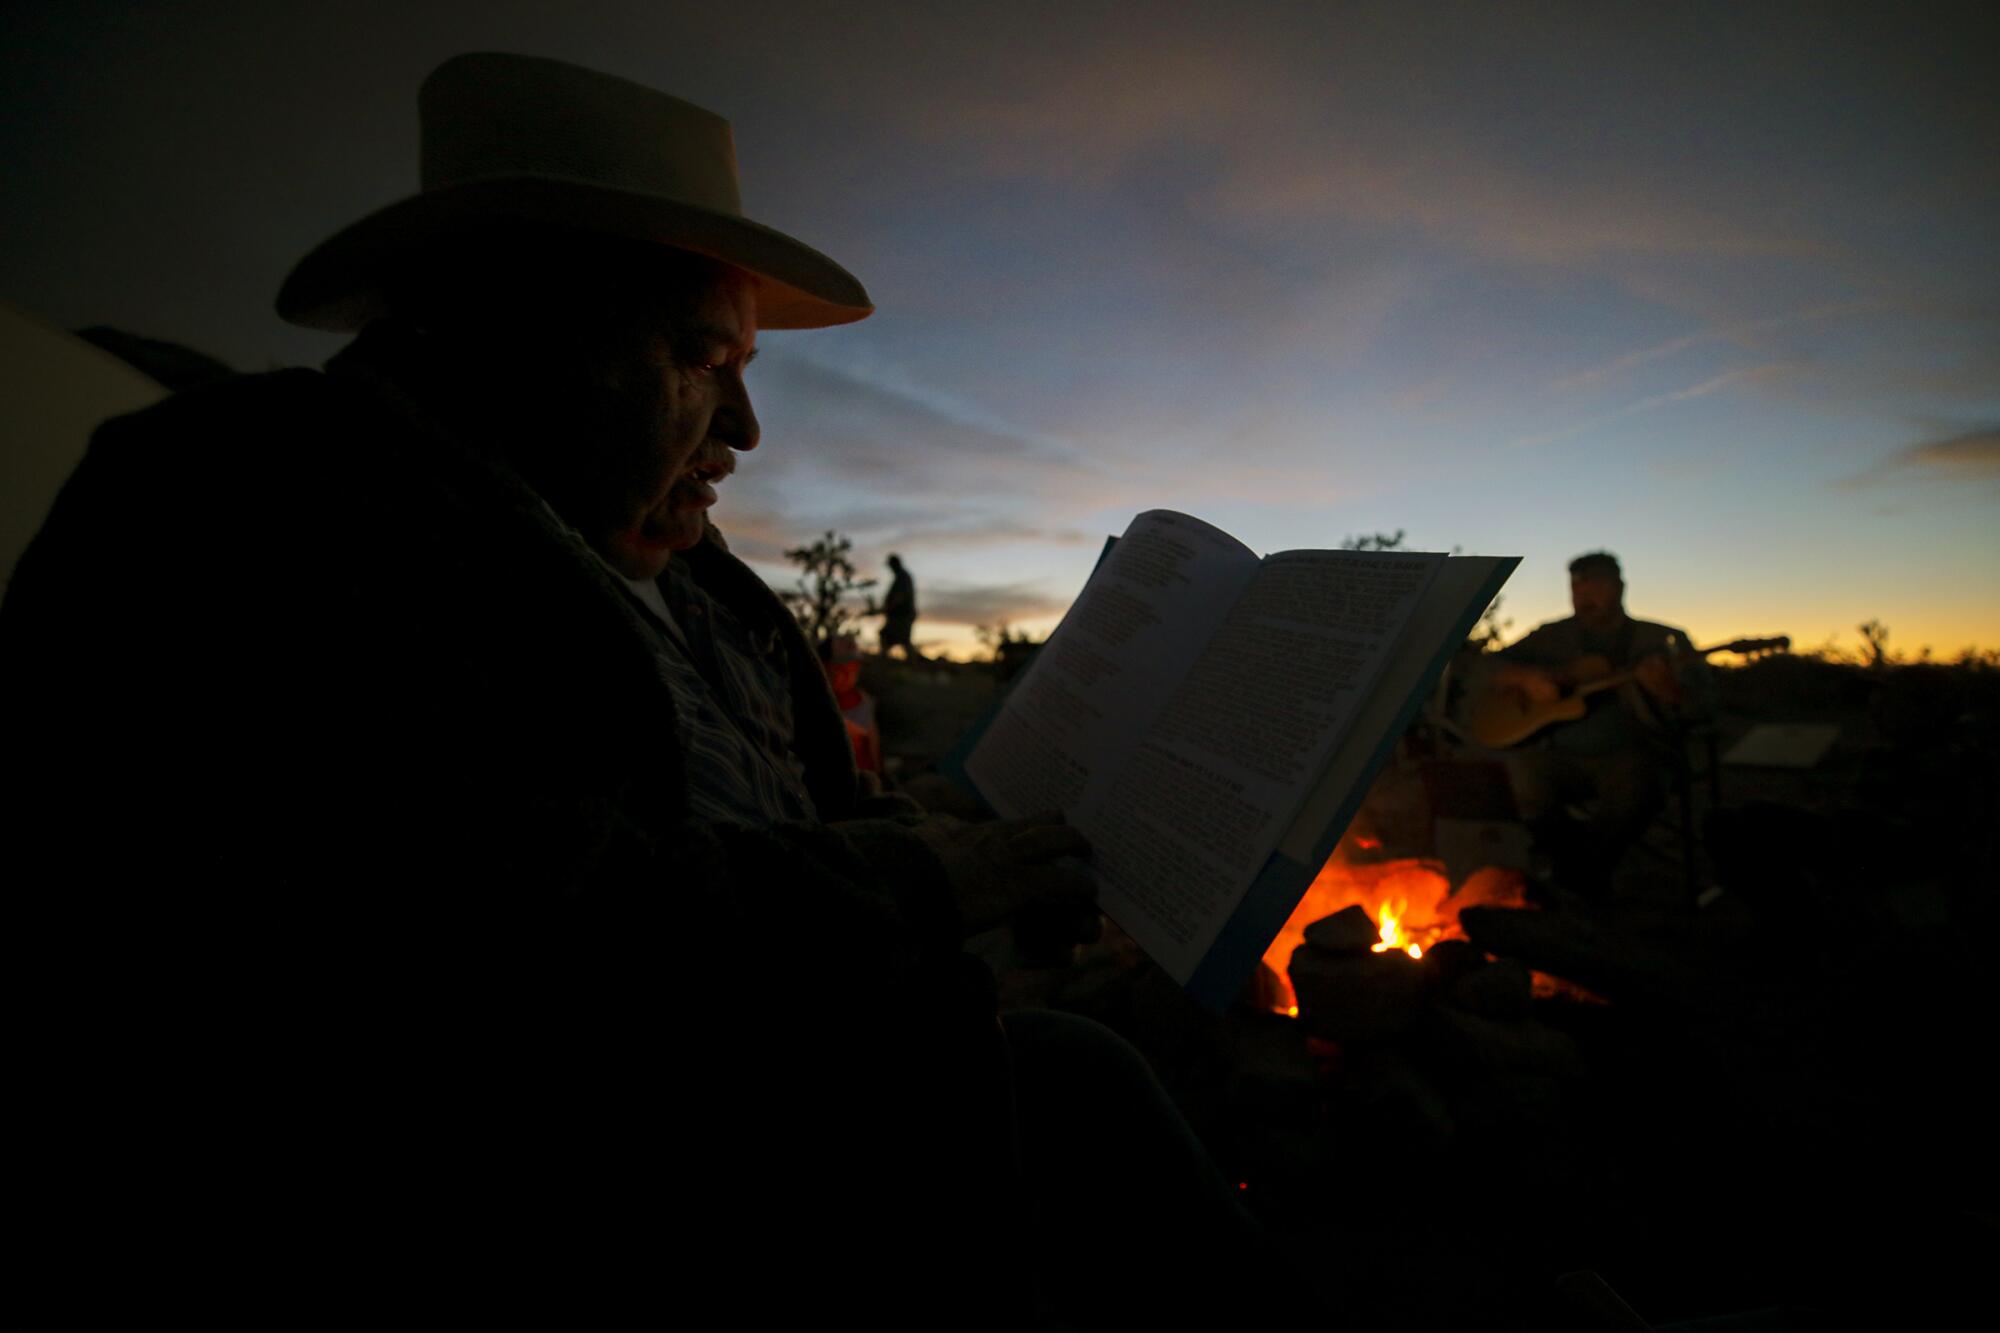 A man reads pages, silhouetted against the dawn sky with a campfire in the background